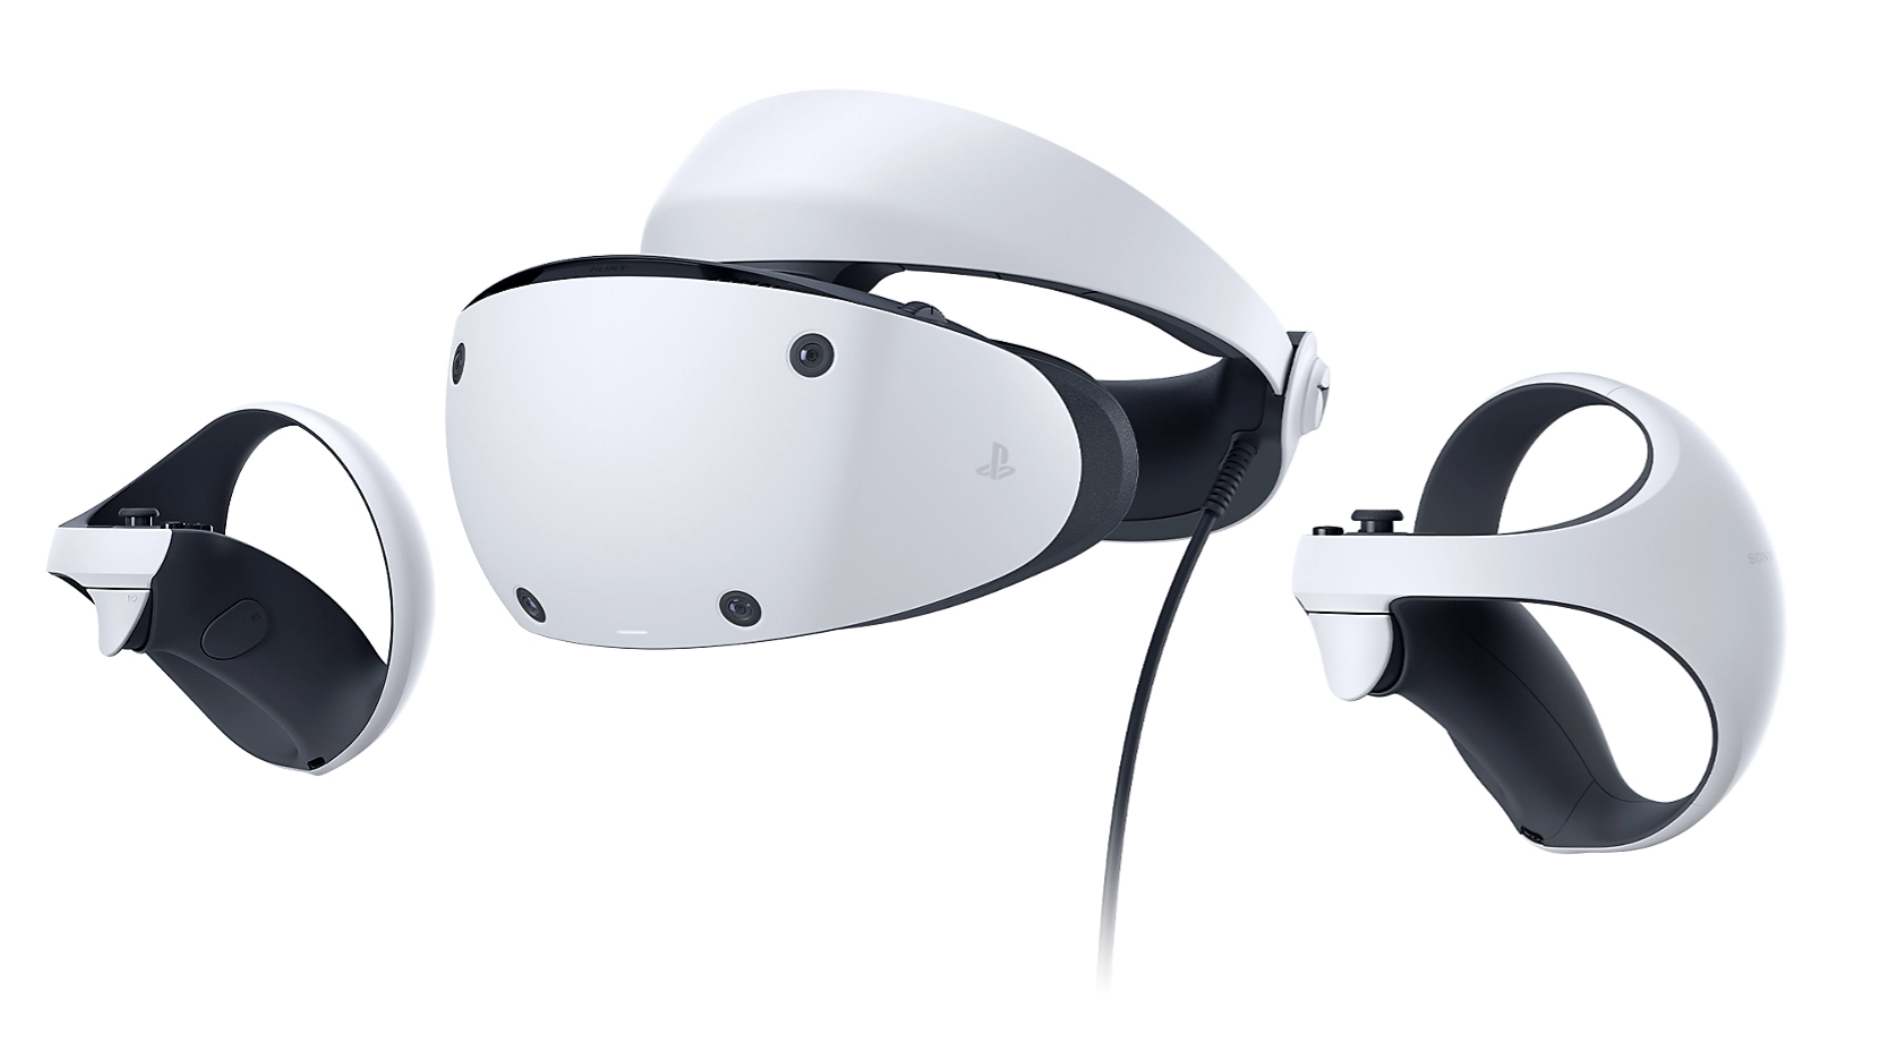 Sony's PSVR 2 will be a major for the VR market - Protocol